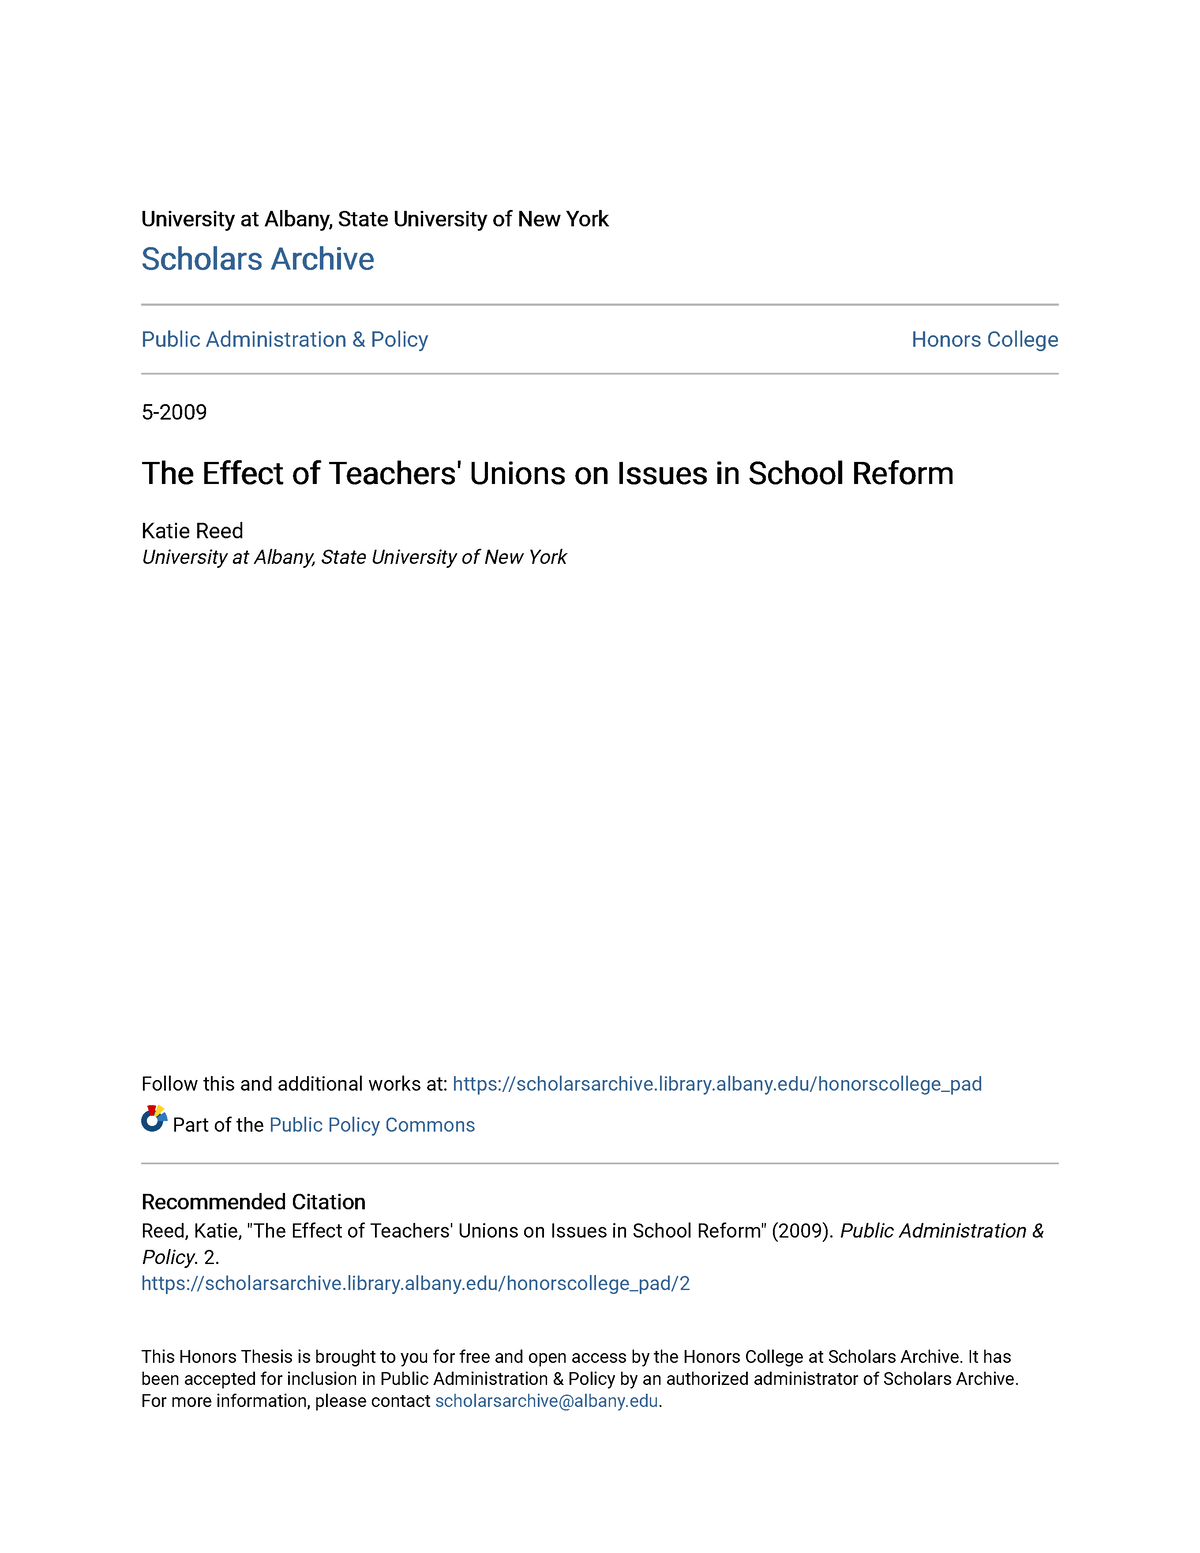 The Effect of Teachers Unions on Issues in School Reform University